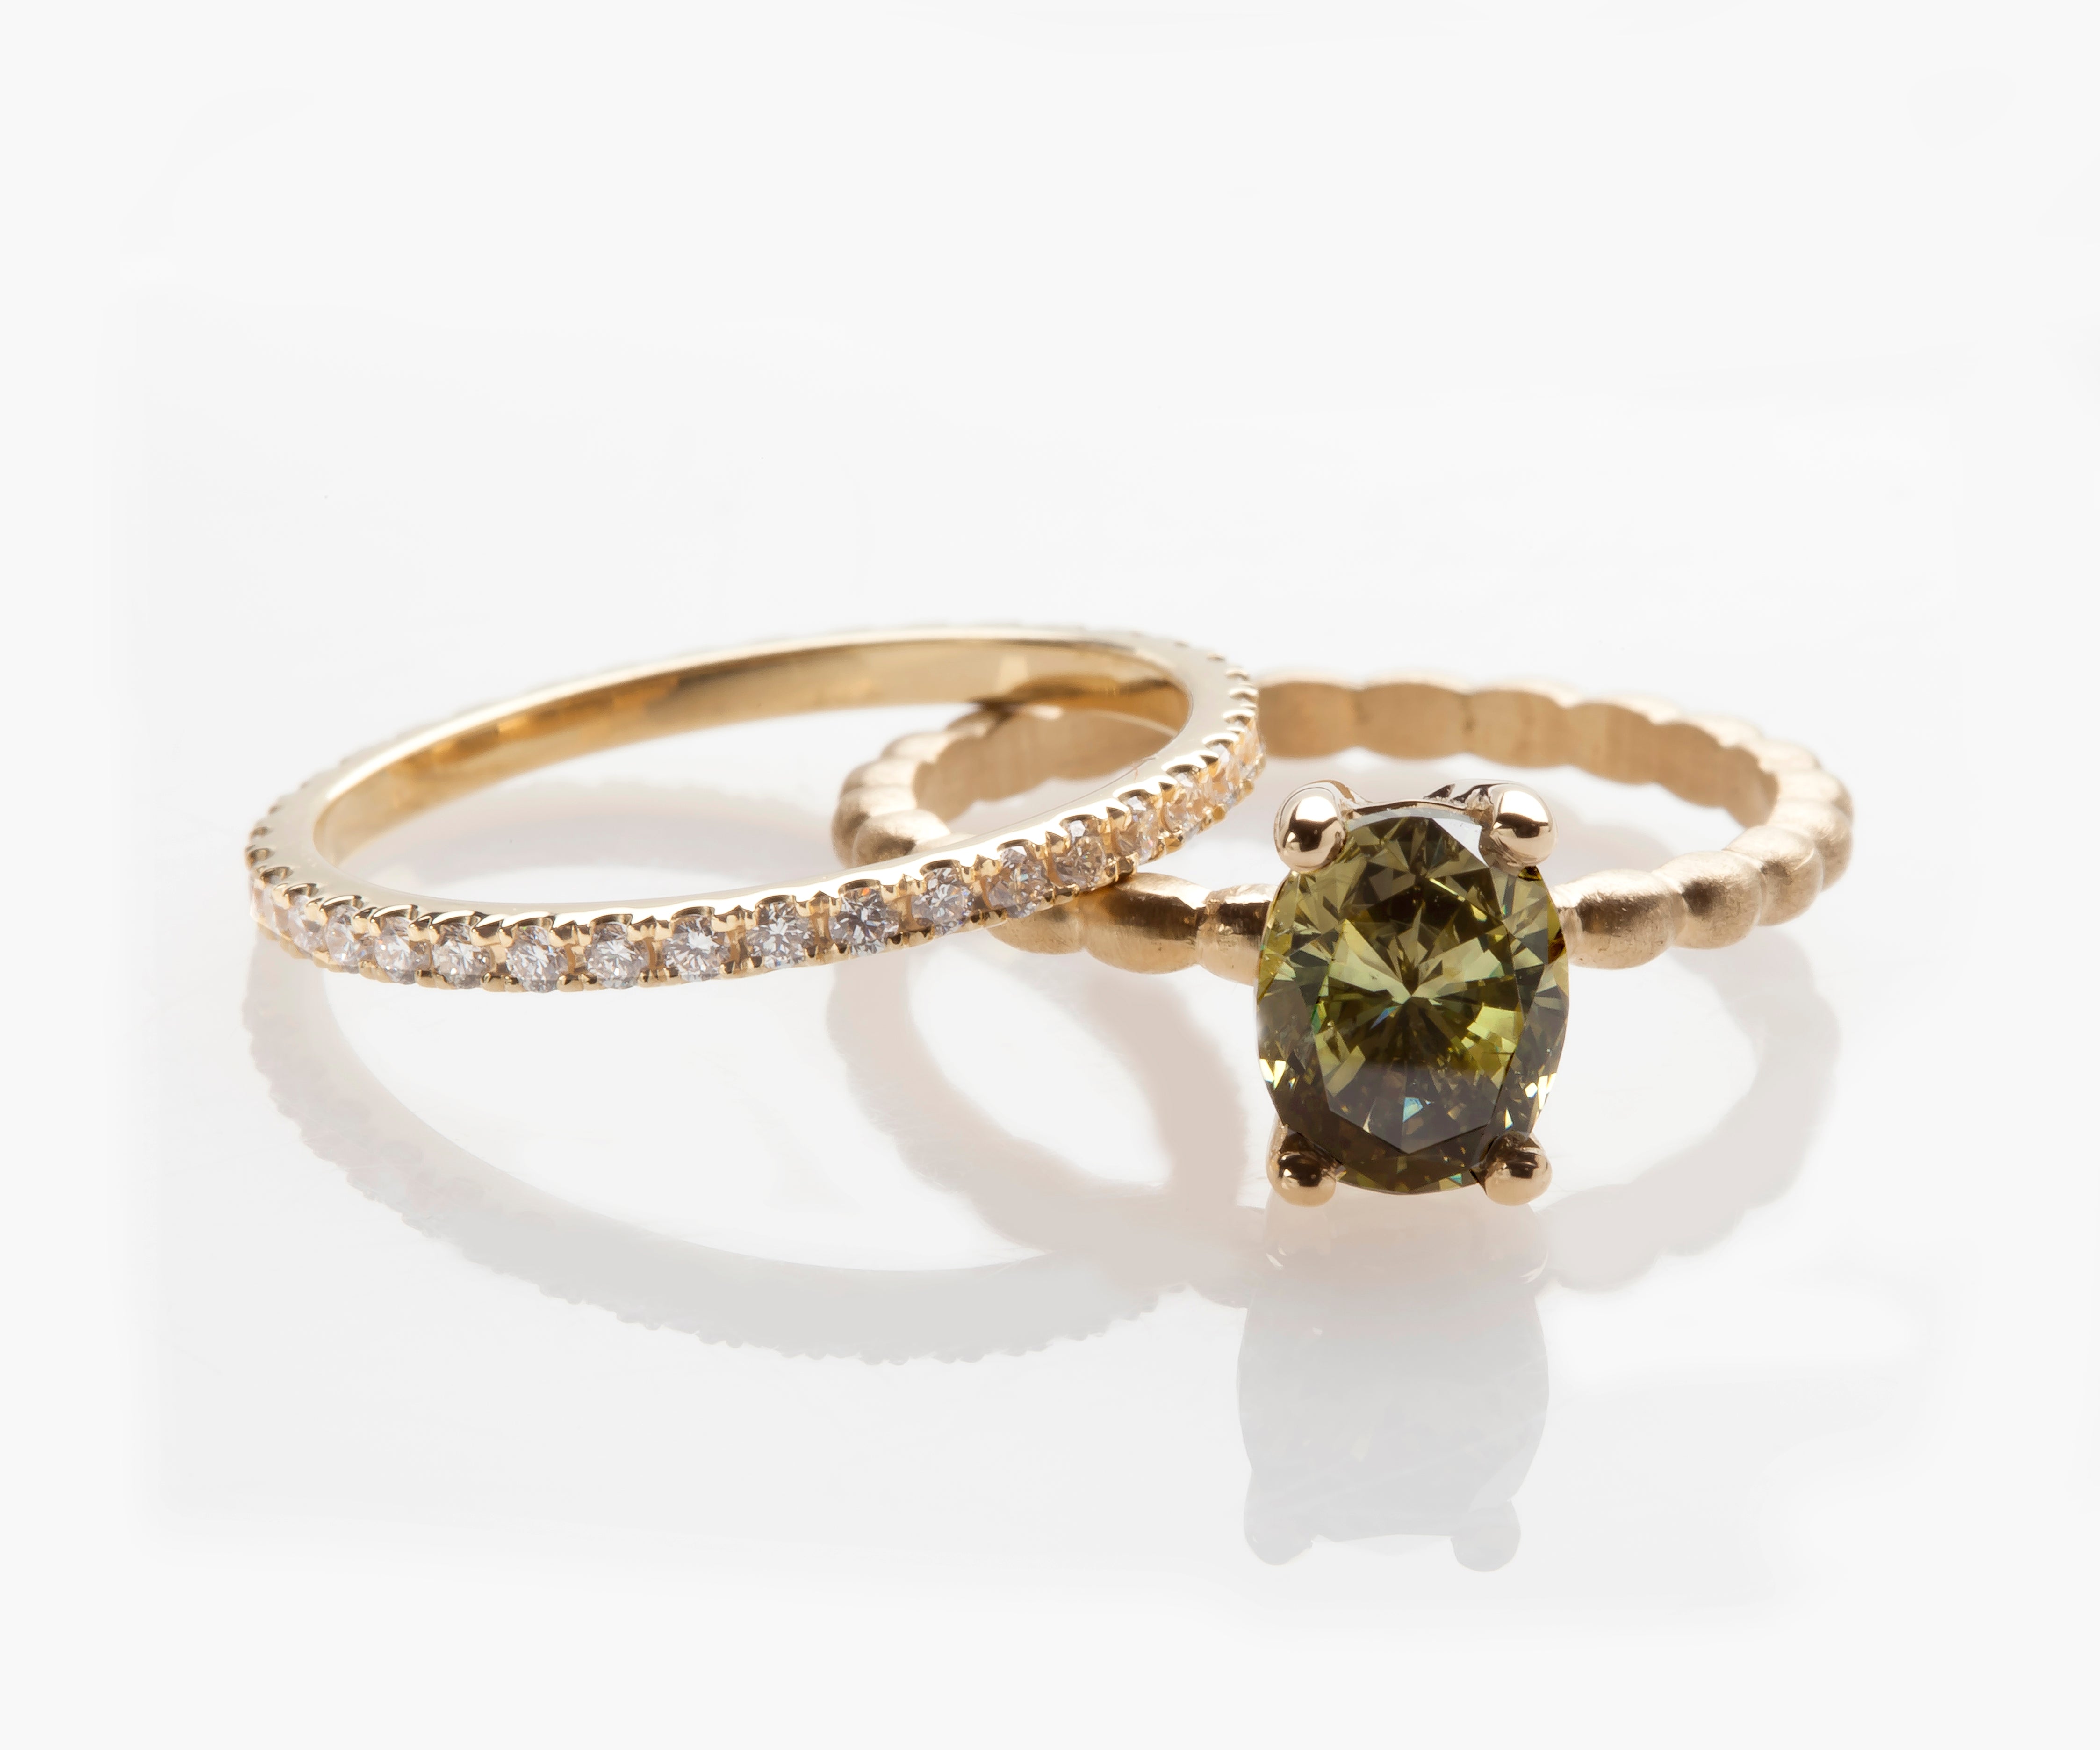 How to Style Natural Green Diamond Jewelry